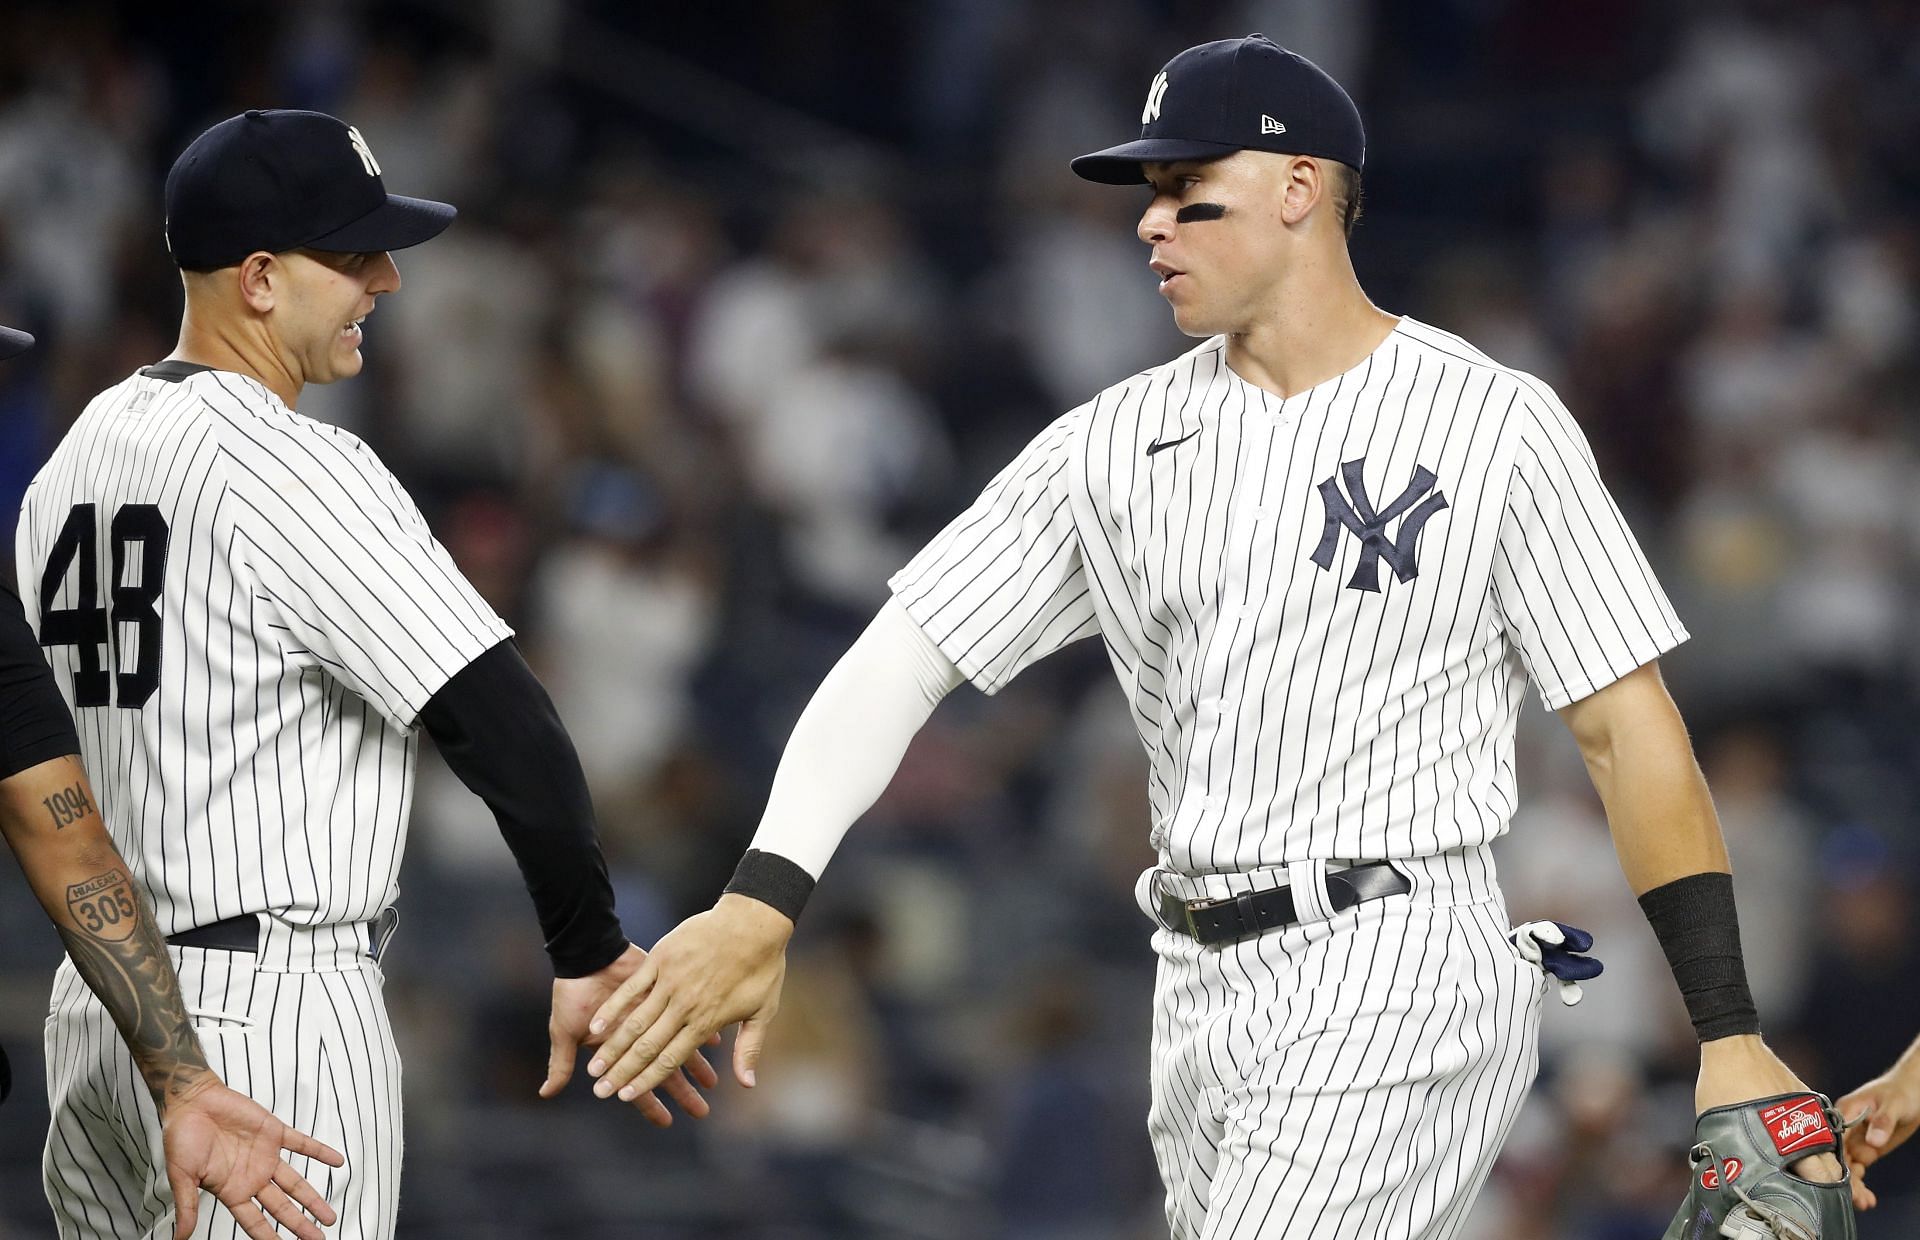 Comparing Current Yankees Roster to 2009 World Series Championship